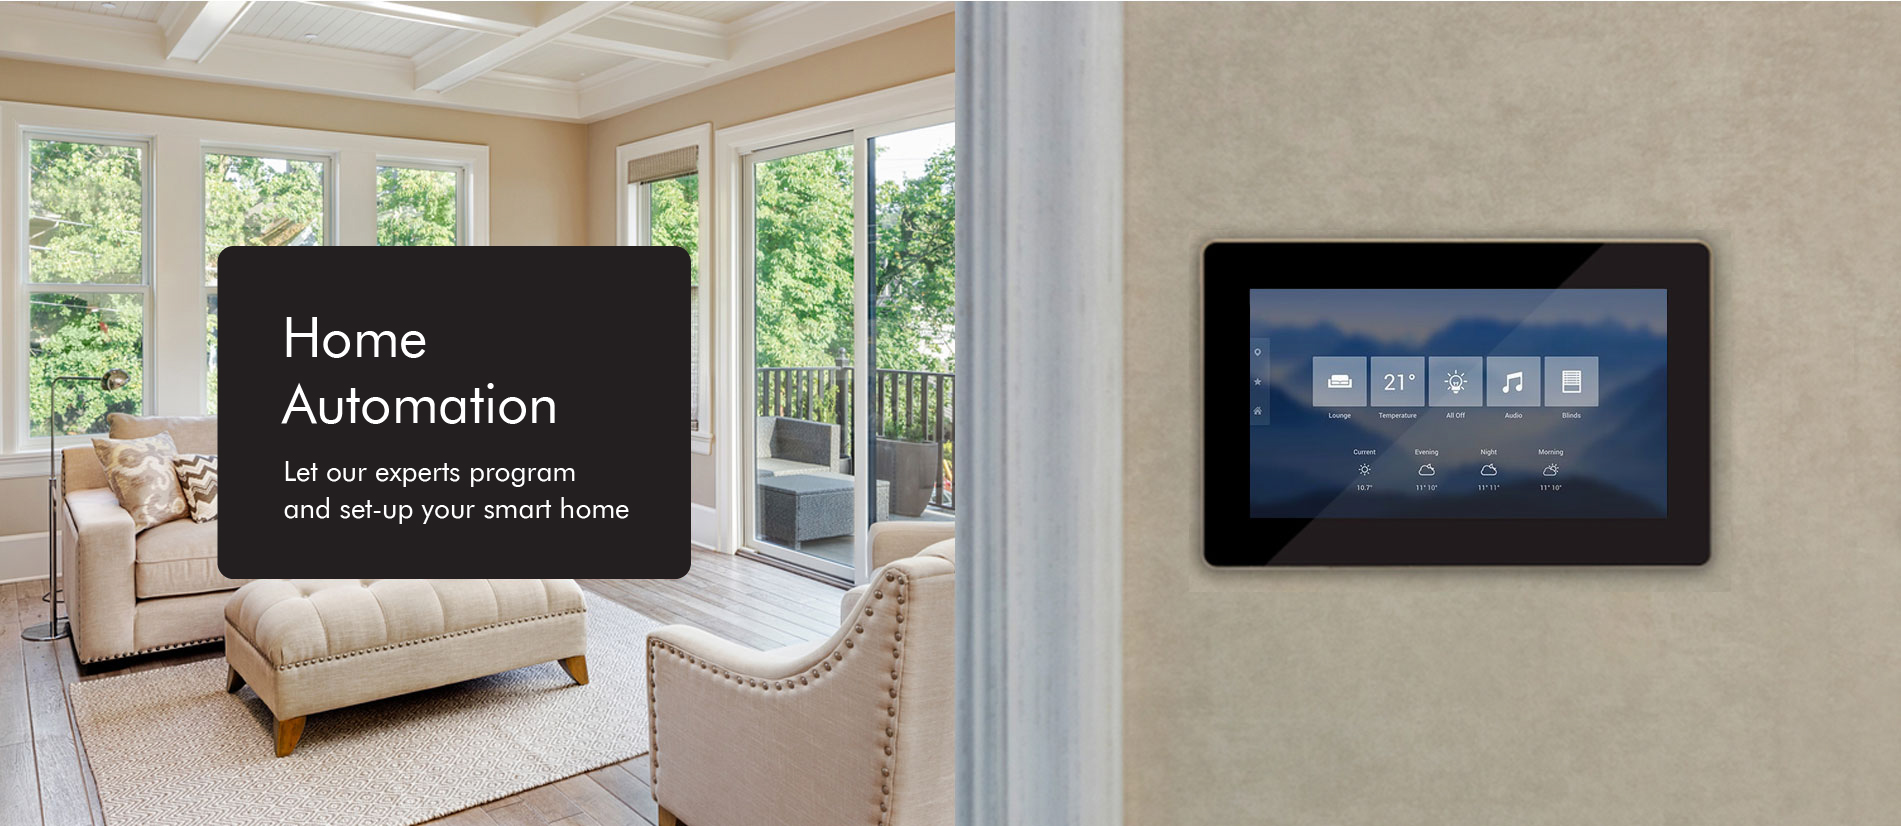 Home Automation Services for your smart home